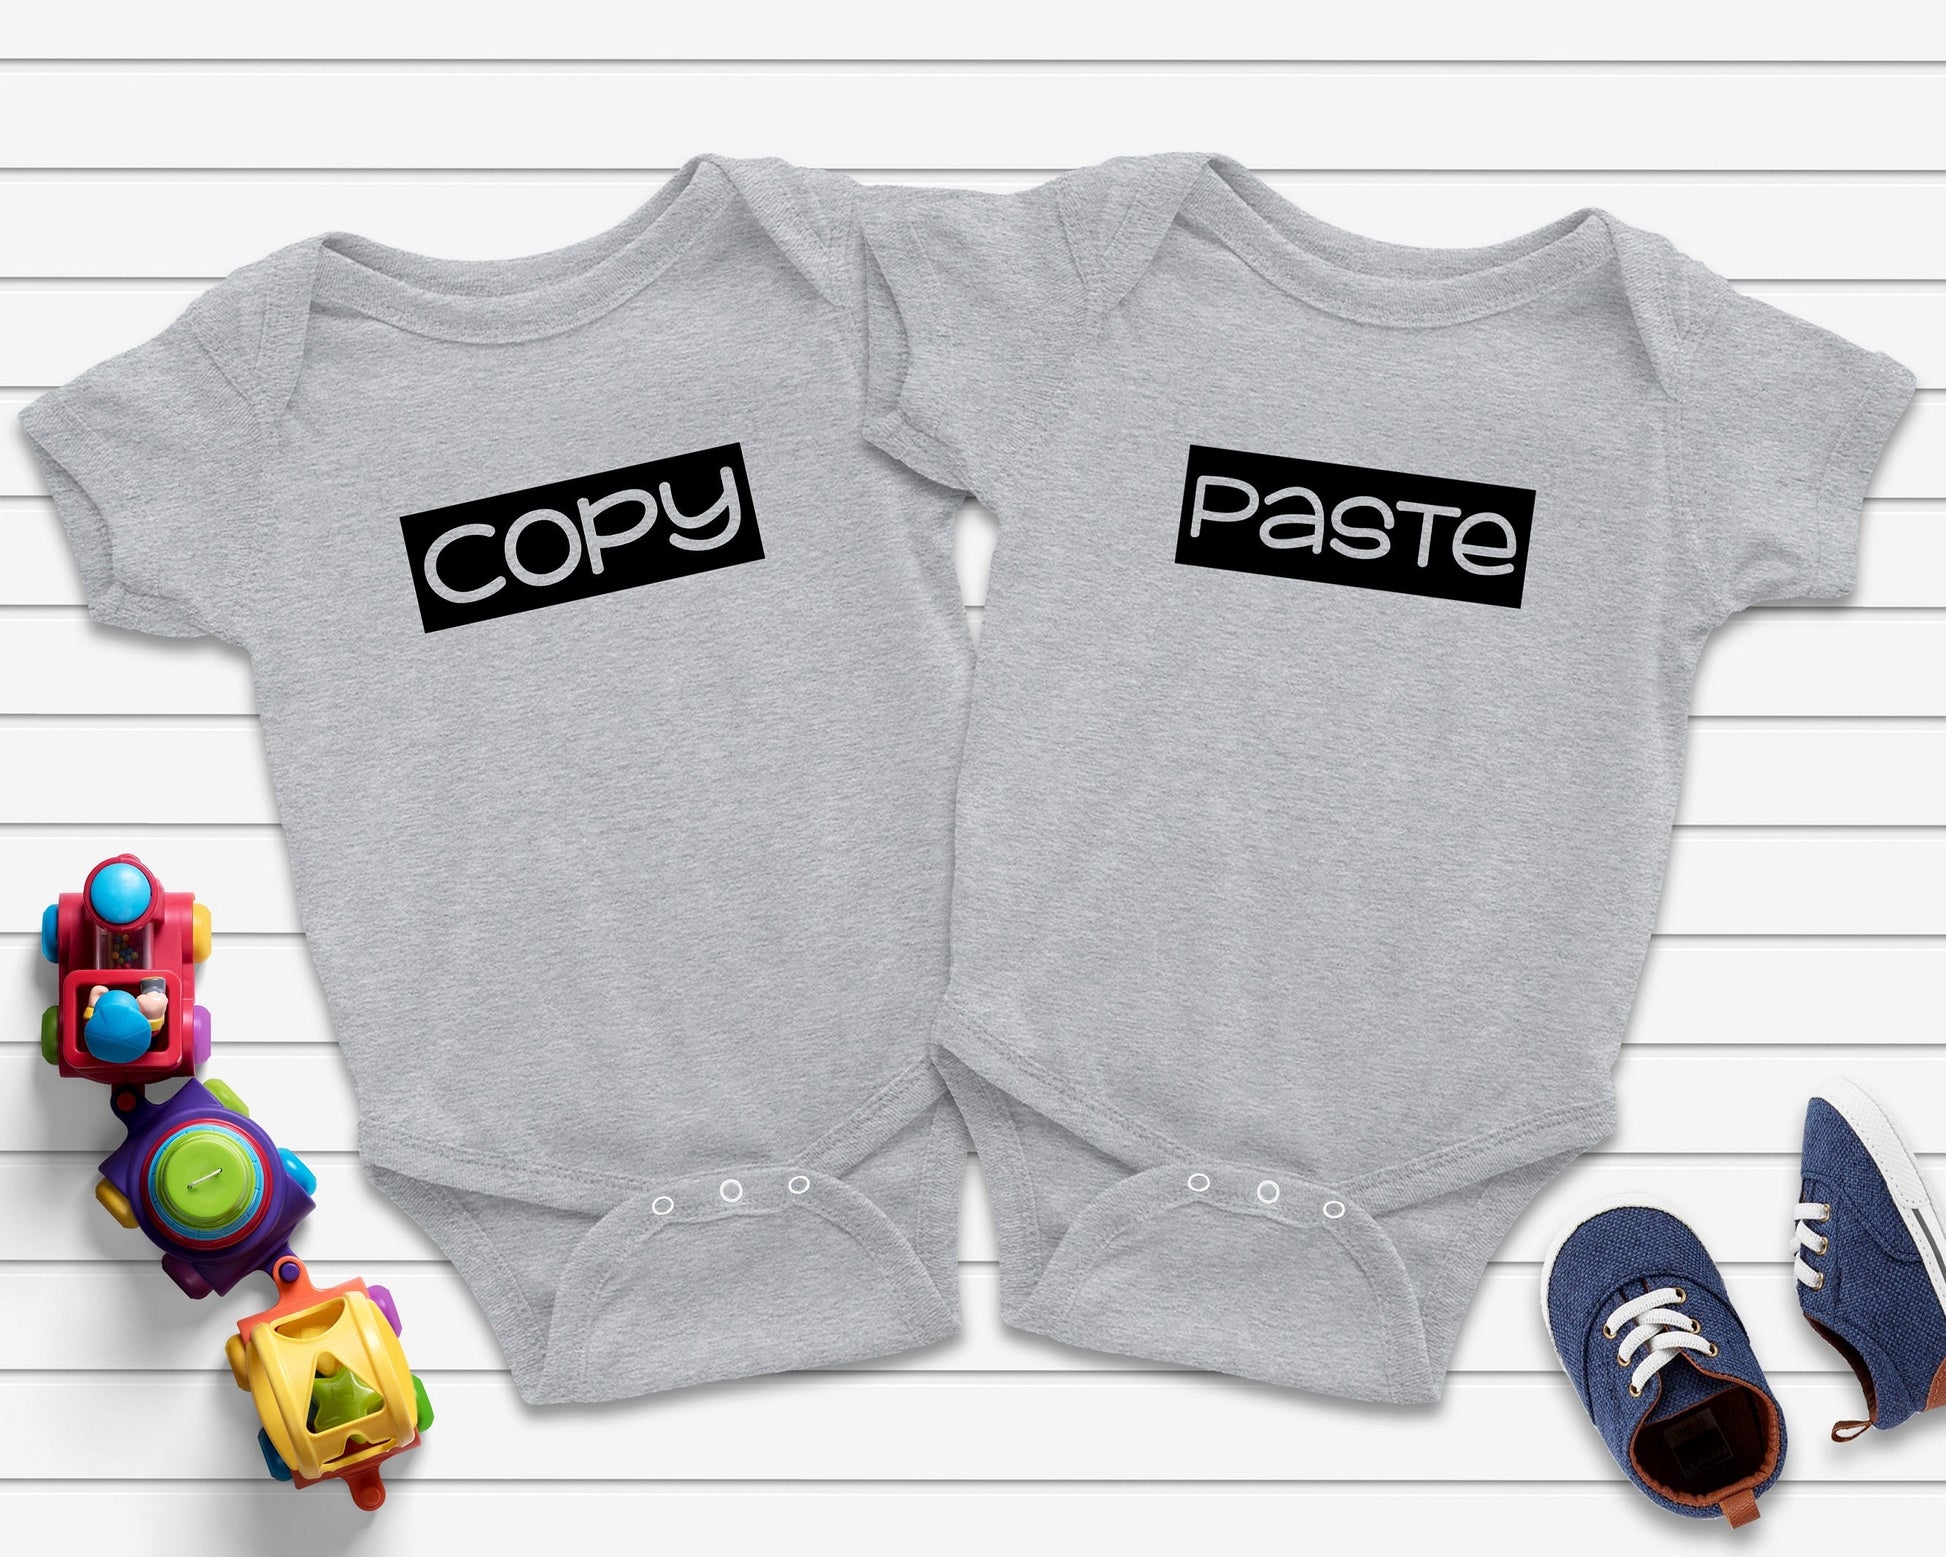 Copy and Paste v2 T-Shirts or Bodysuits for Twins - Identical Twins - Twin Tees - Fraternal Twins - Shirts for Twins - Twin Outfits